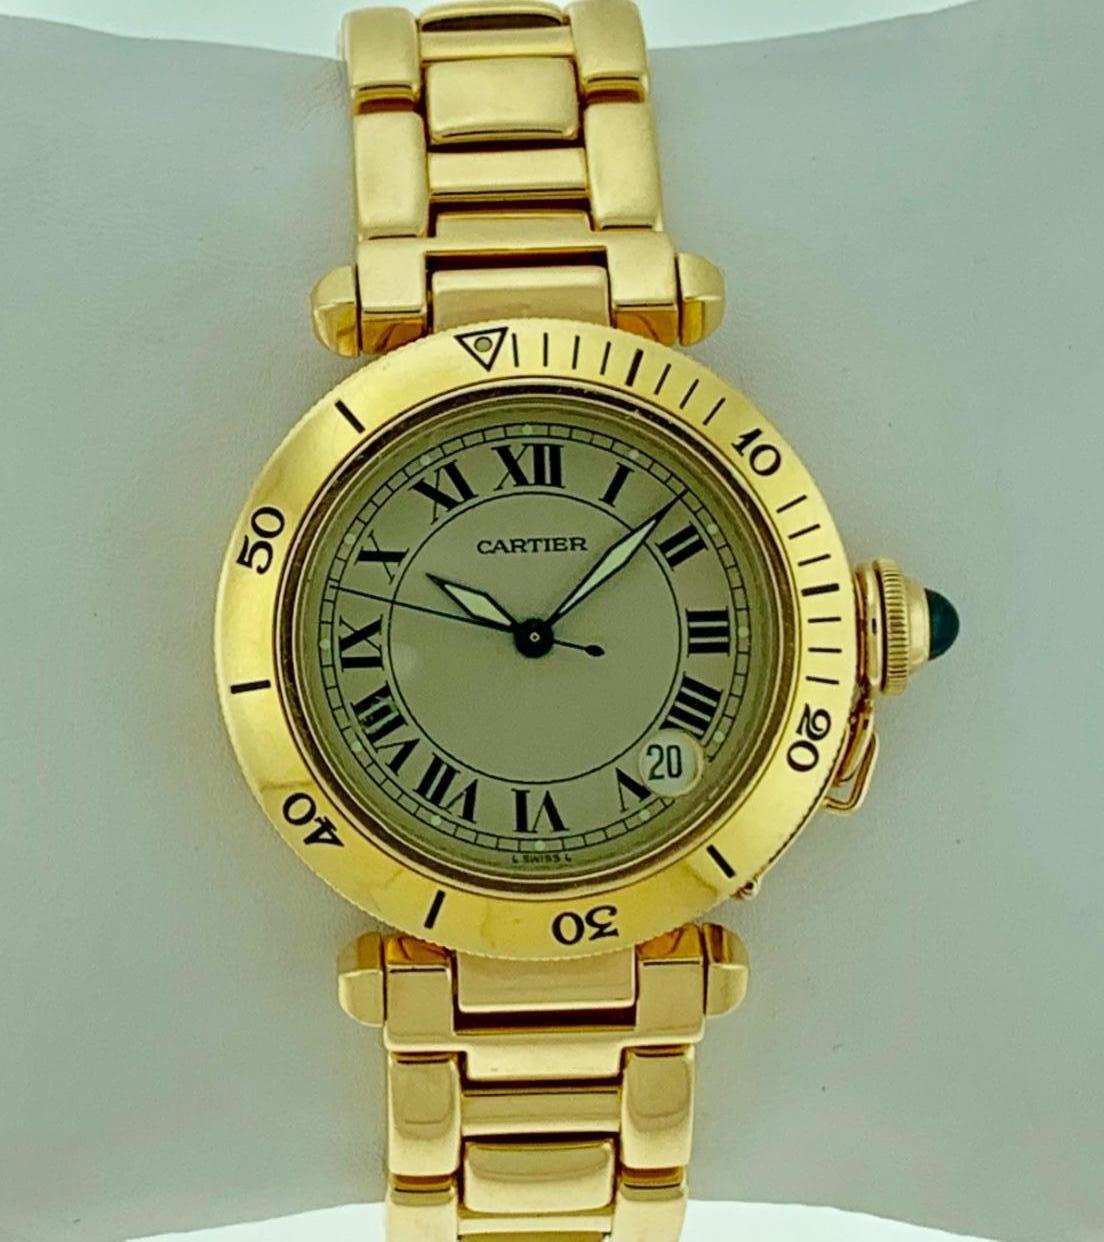 150 Gm 18 Karat Solid Yellow Gold Cartier Pasha Automatic Watch Water Resistant 8